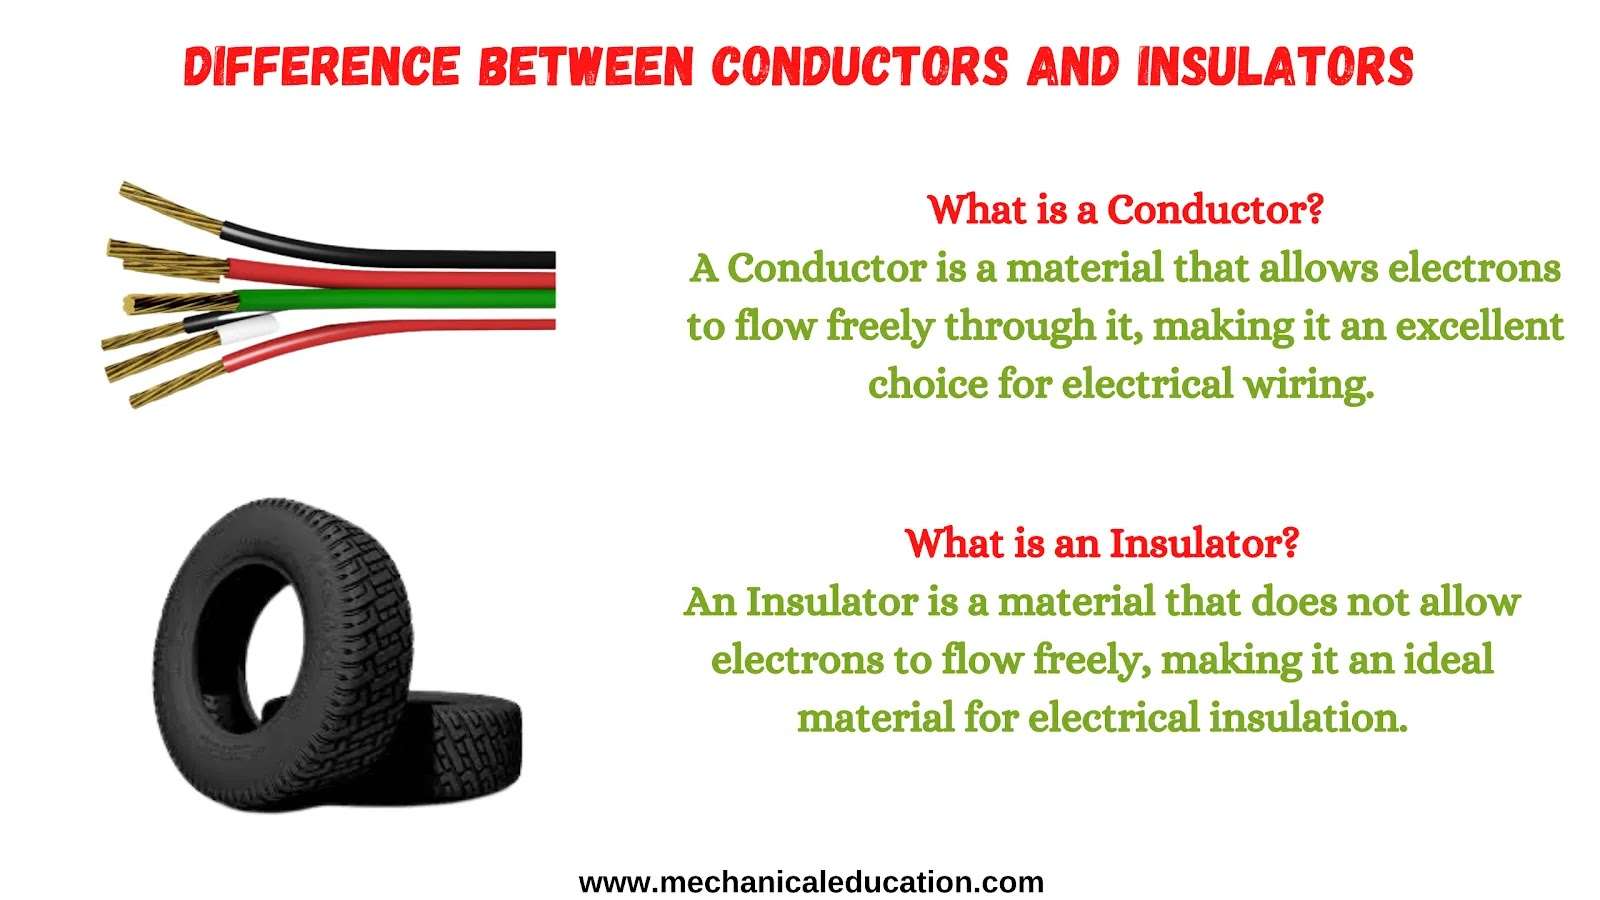 Difference between Conductors and Insulators - Mechanical Education